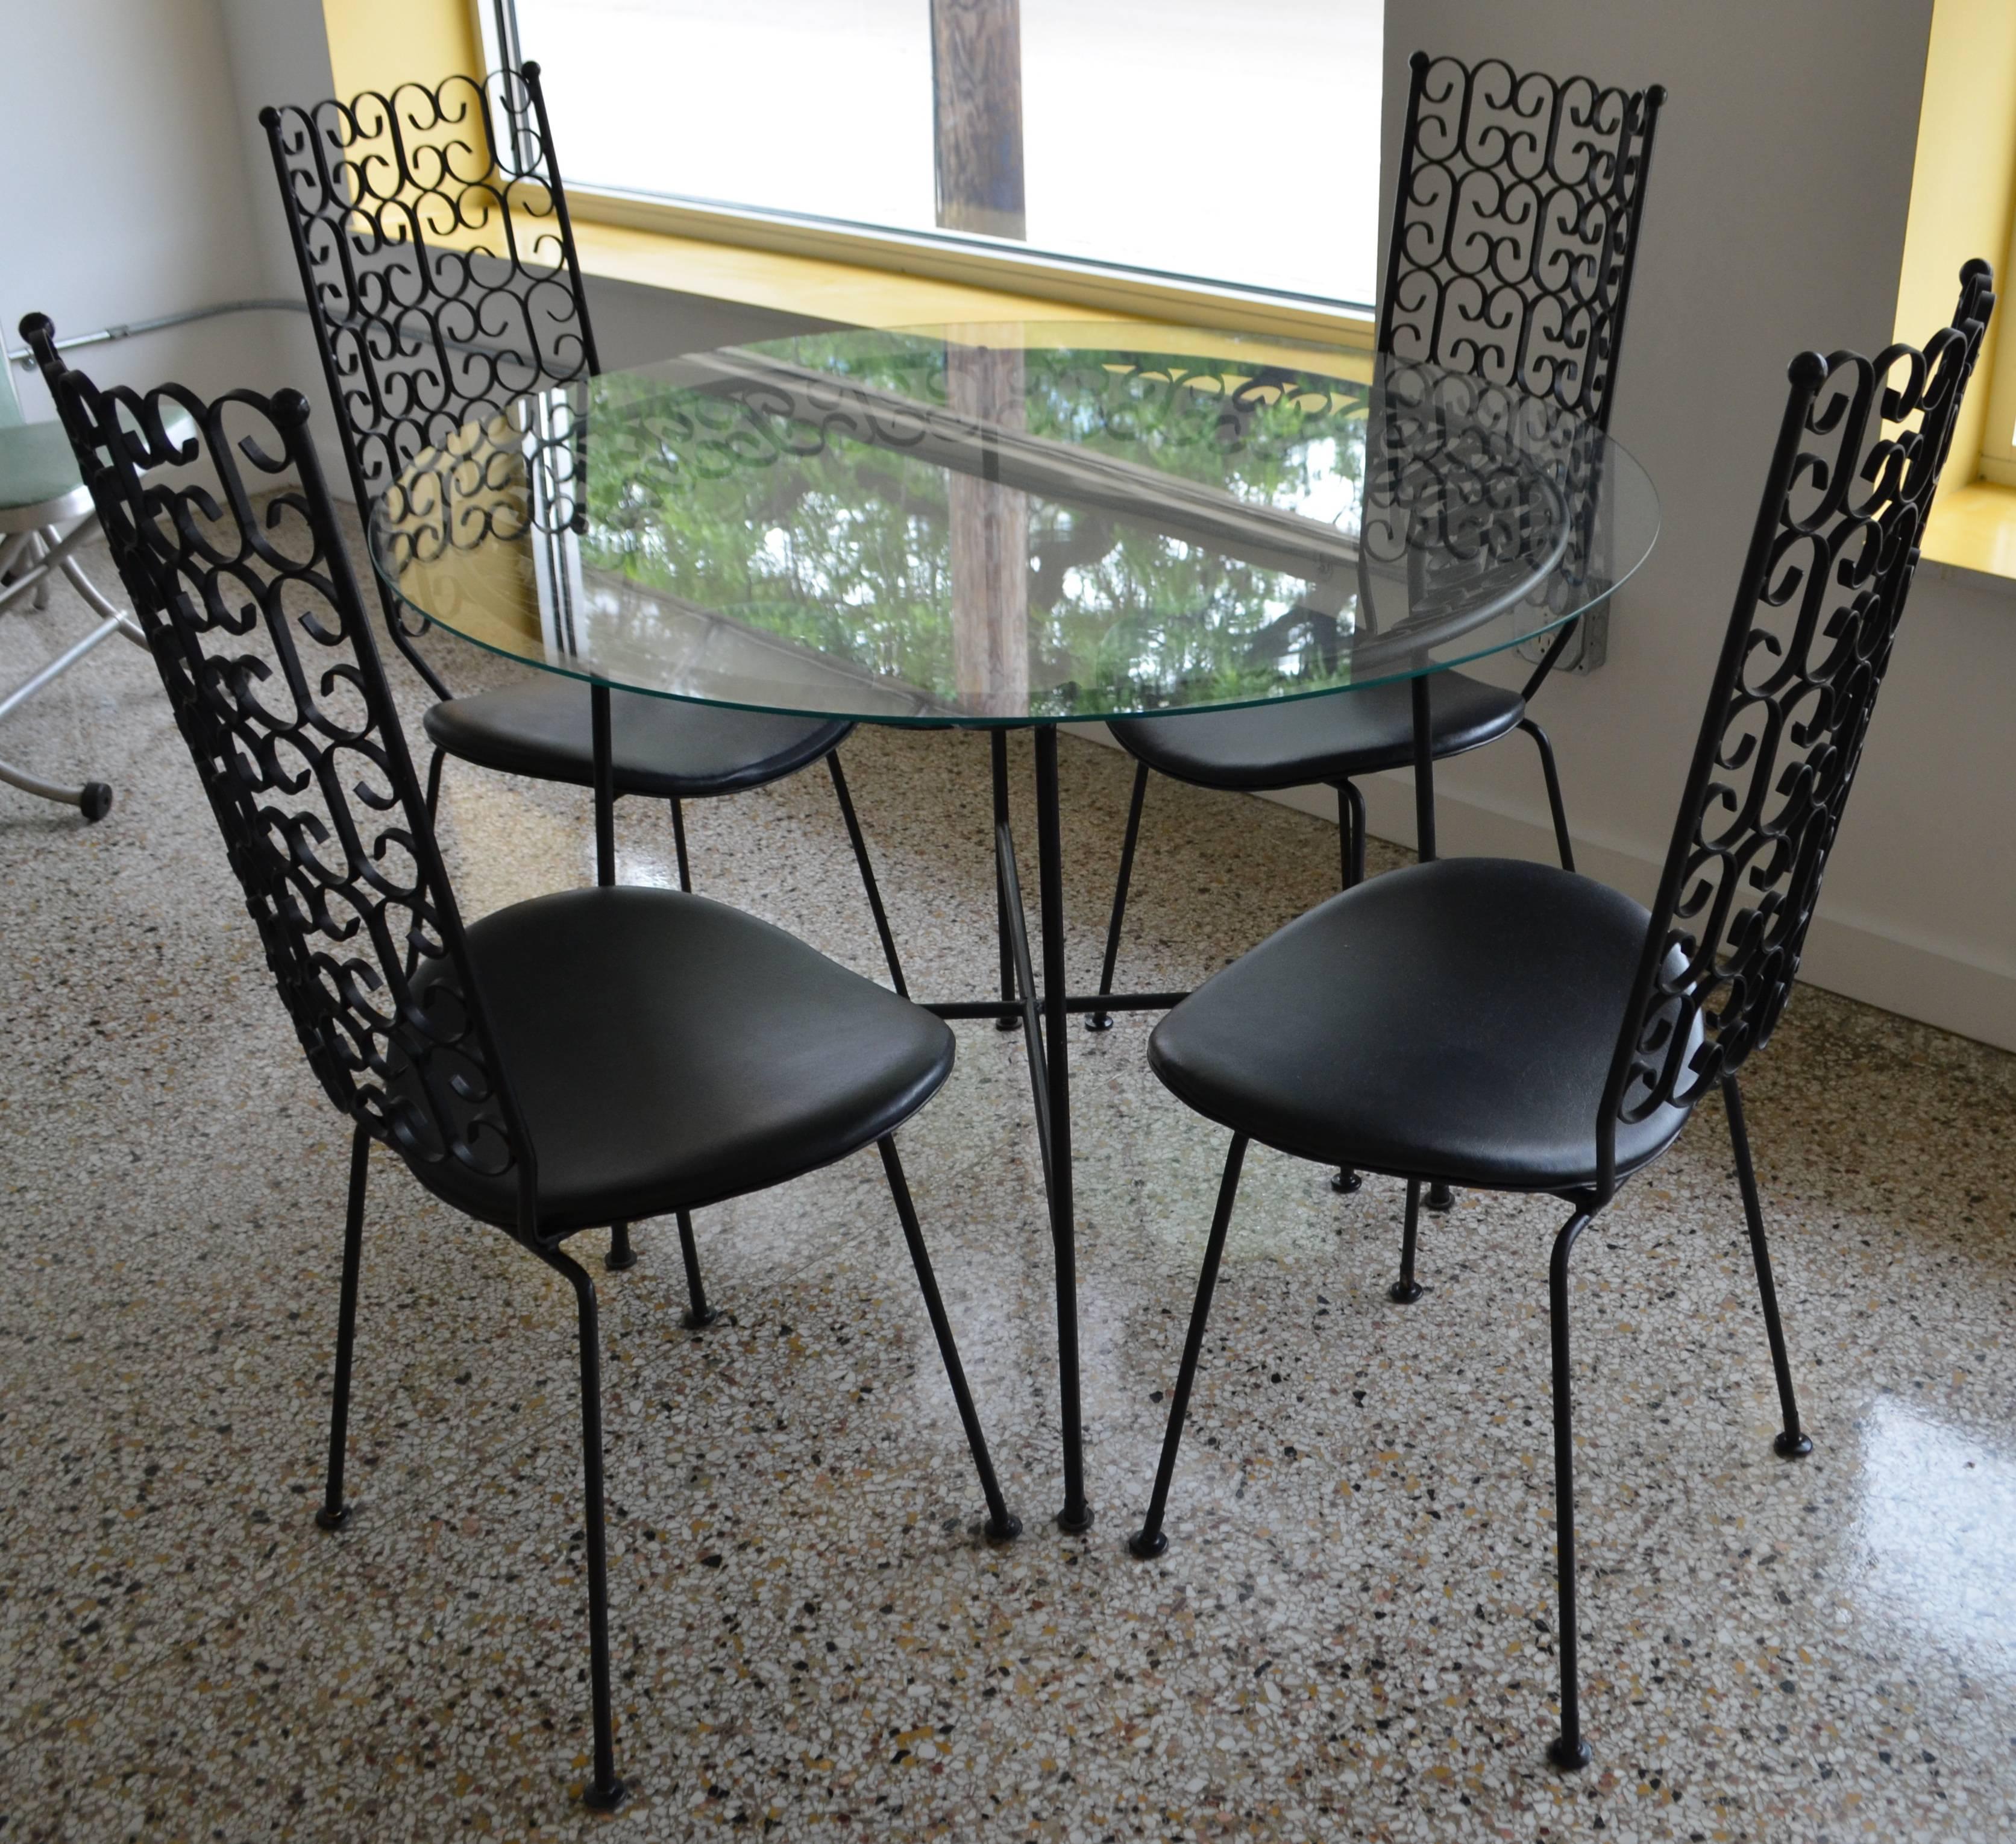 Arthur Umanoff wrought iron patio set of table and four chairs from The Grenada collection. Each chair measures: 16.5 inches D x 18.5 inches W x 40.5 inches H. Floor to seat is 18 inches. Table dimensions noted below.